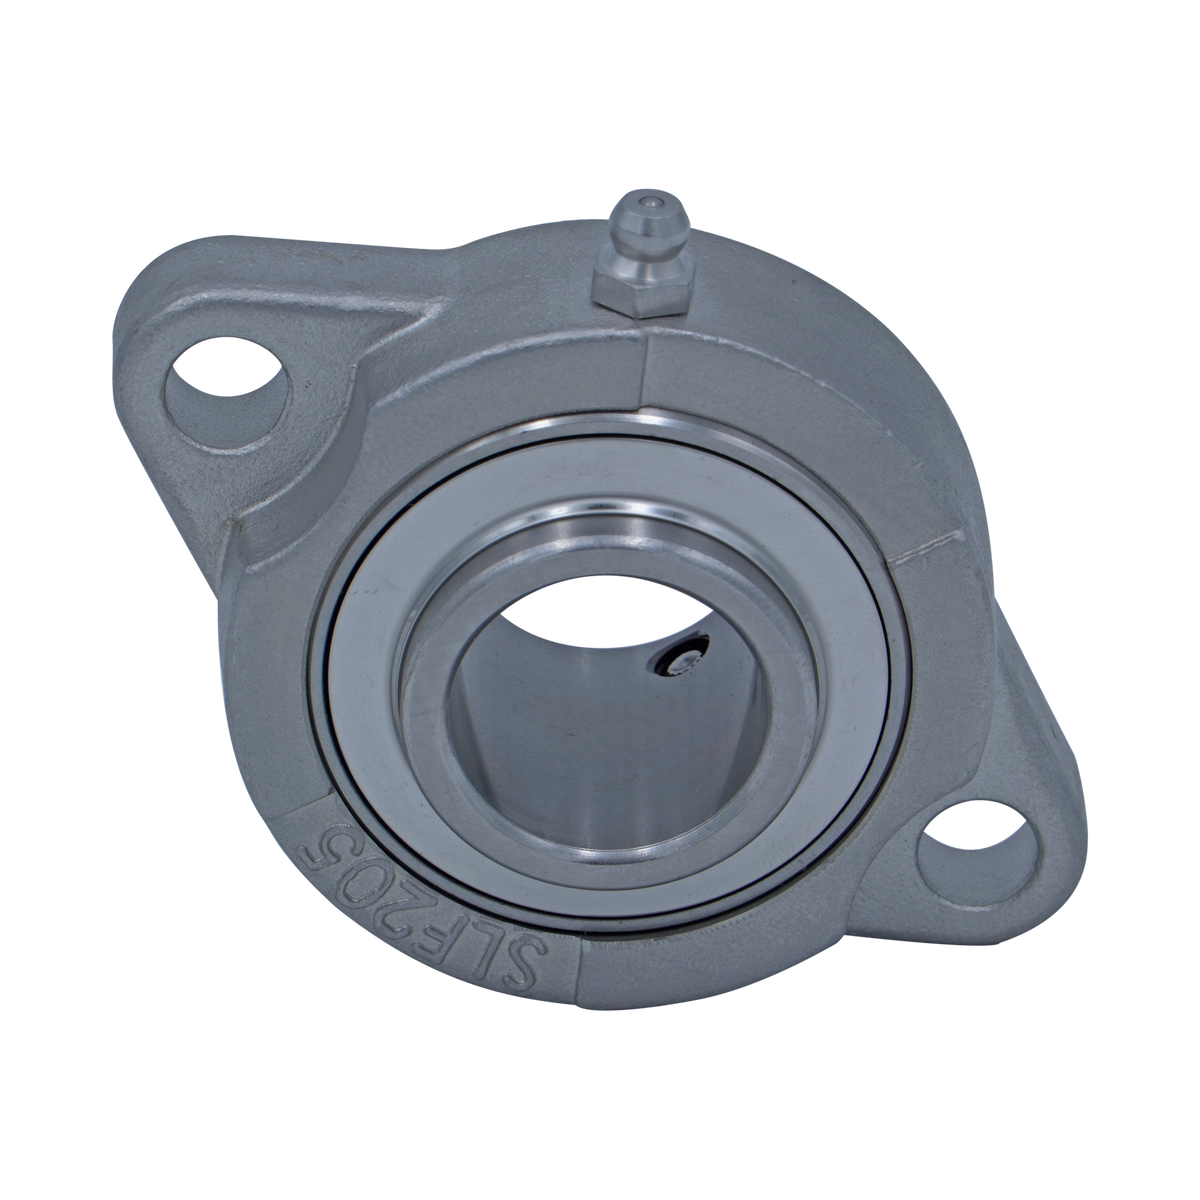 Stainless Steel Greaseable Bearing with Stainless Flange